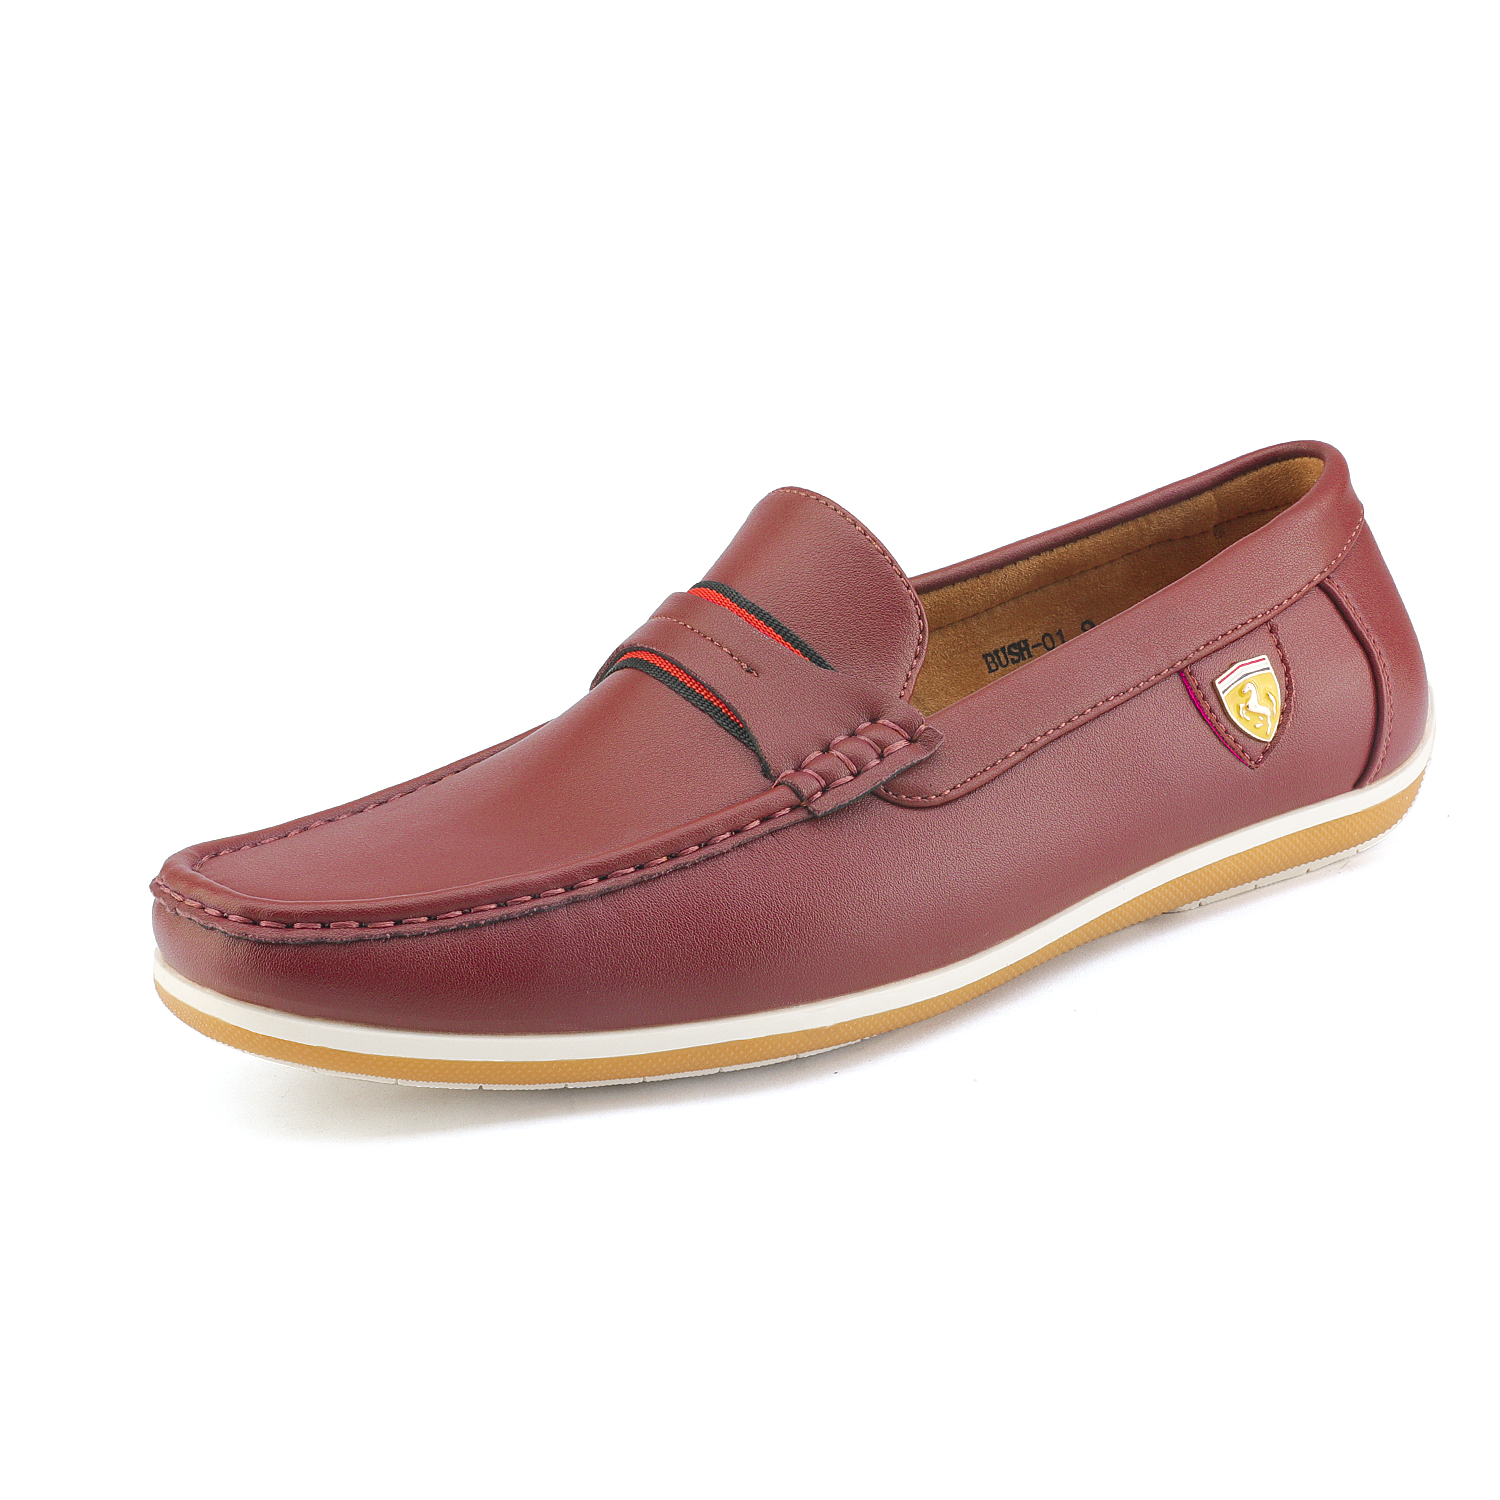 Bruno Marc Men's Casual Lightweight Loafers Shoes Lazy Moccasins Loafers Driving Soft Shoes For Men BUSH-01 BURGUNDY Size 10 - image 1 of 5